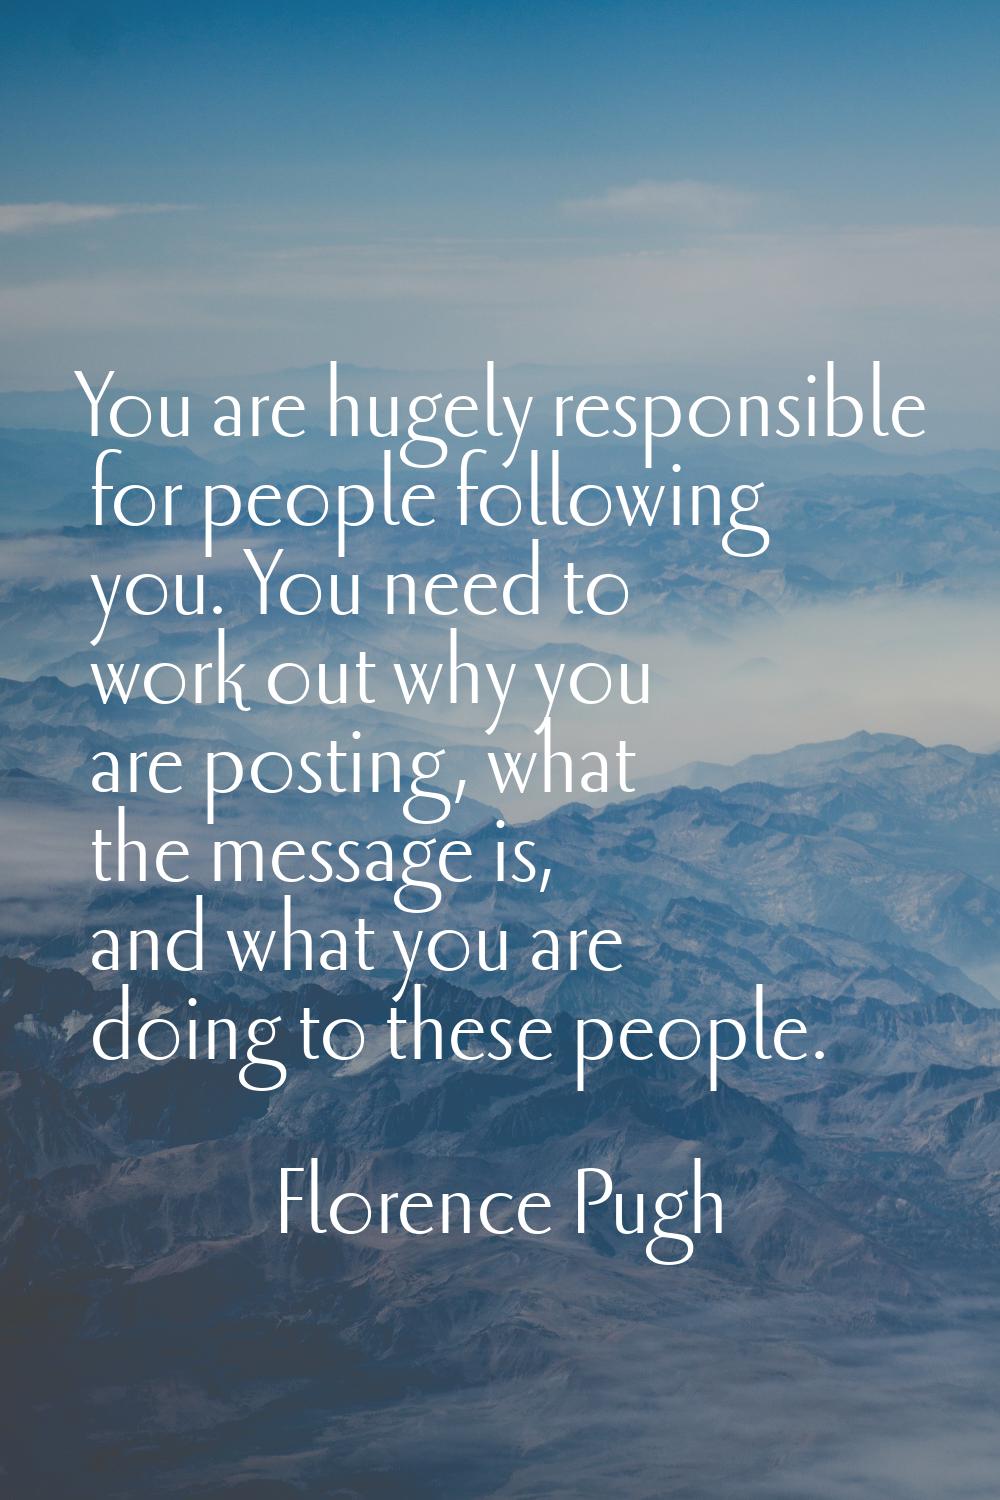 You are hugely responsible for people following you. You need to work out why you are posting, what